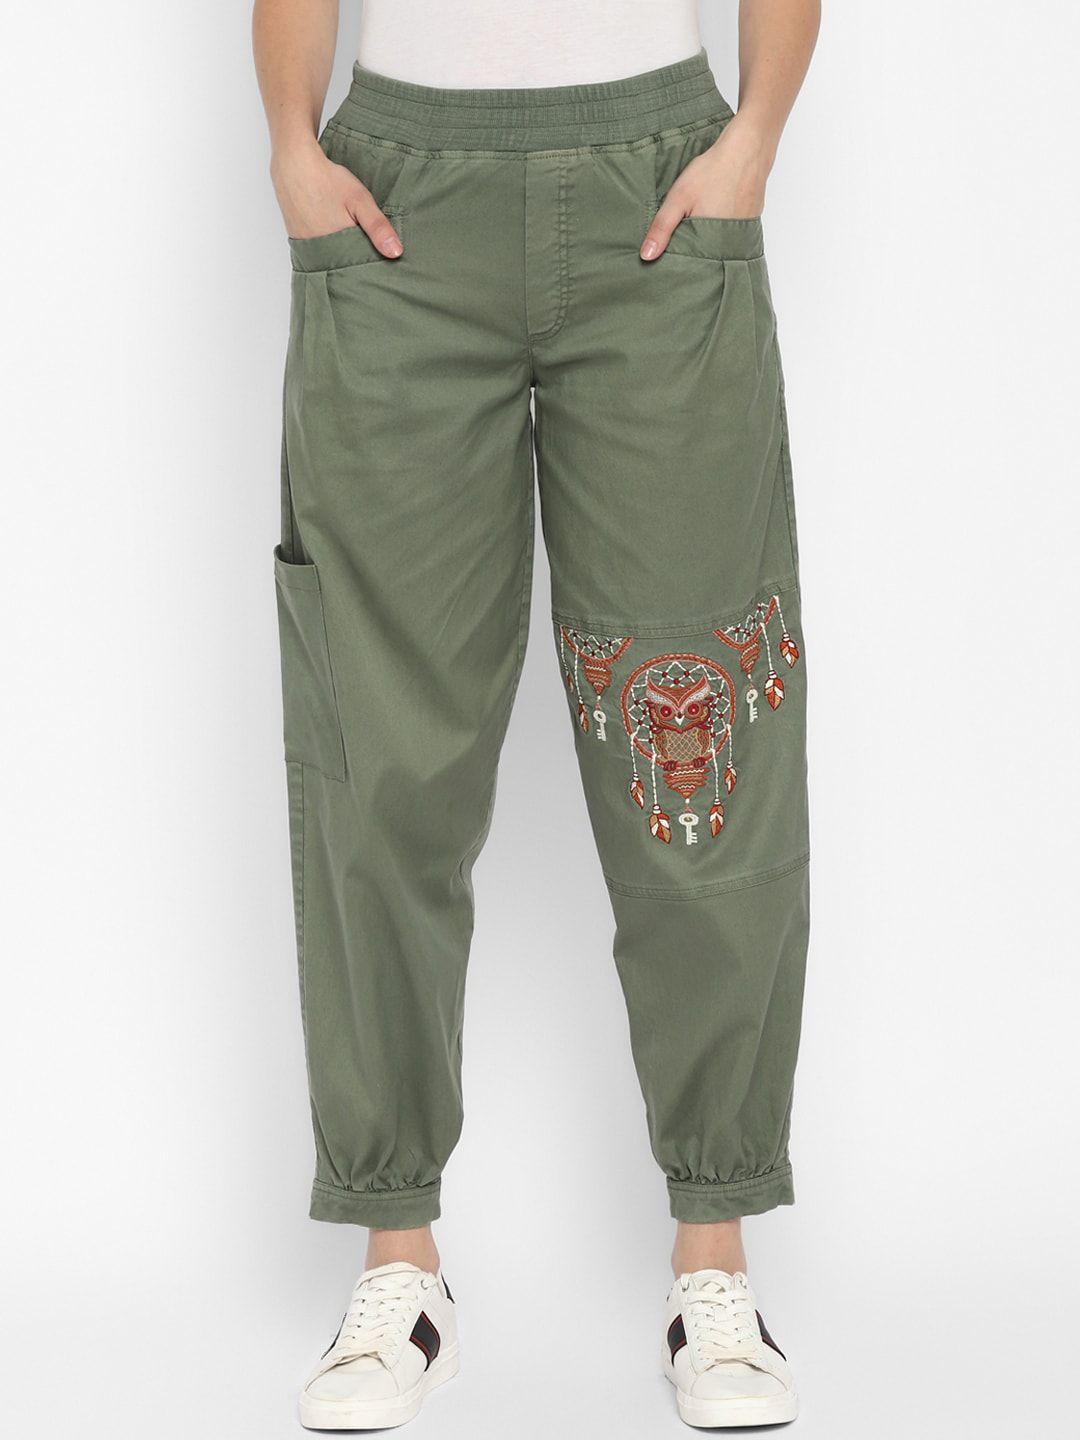 taurus-women-teal-green-relaxed-loose-fit-joggers-trousers